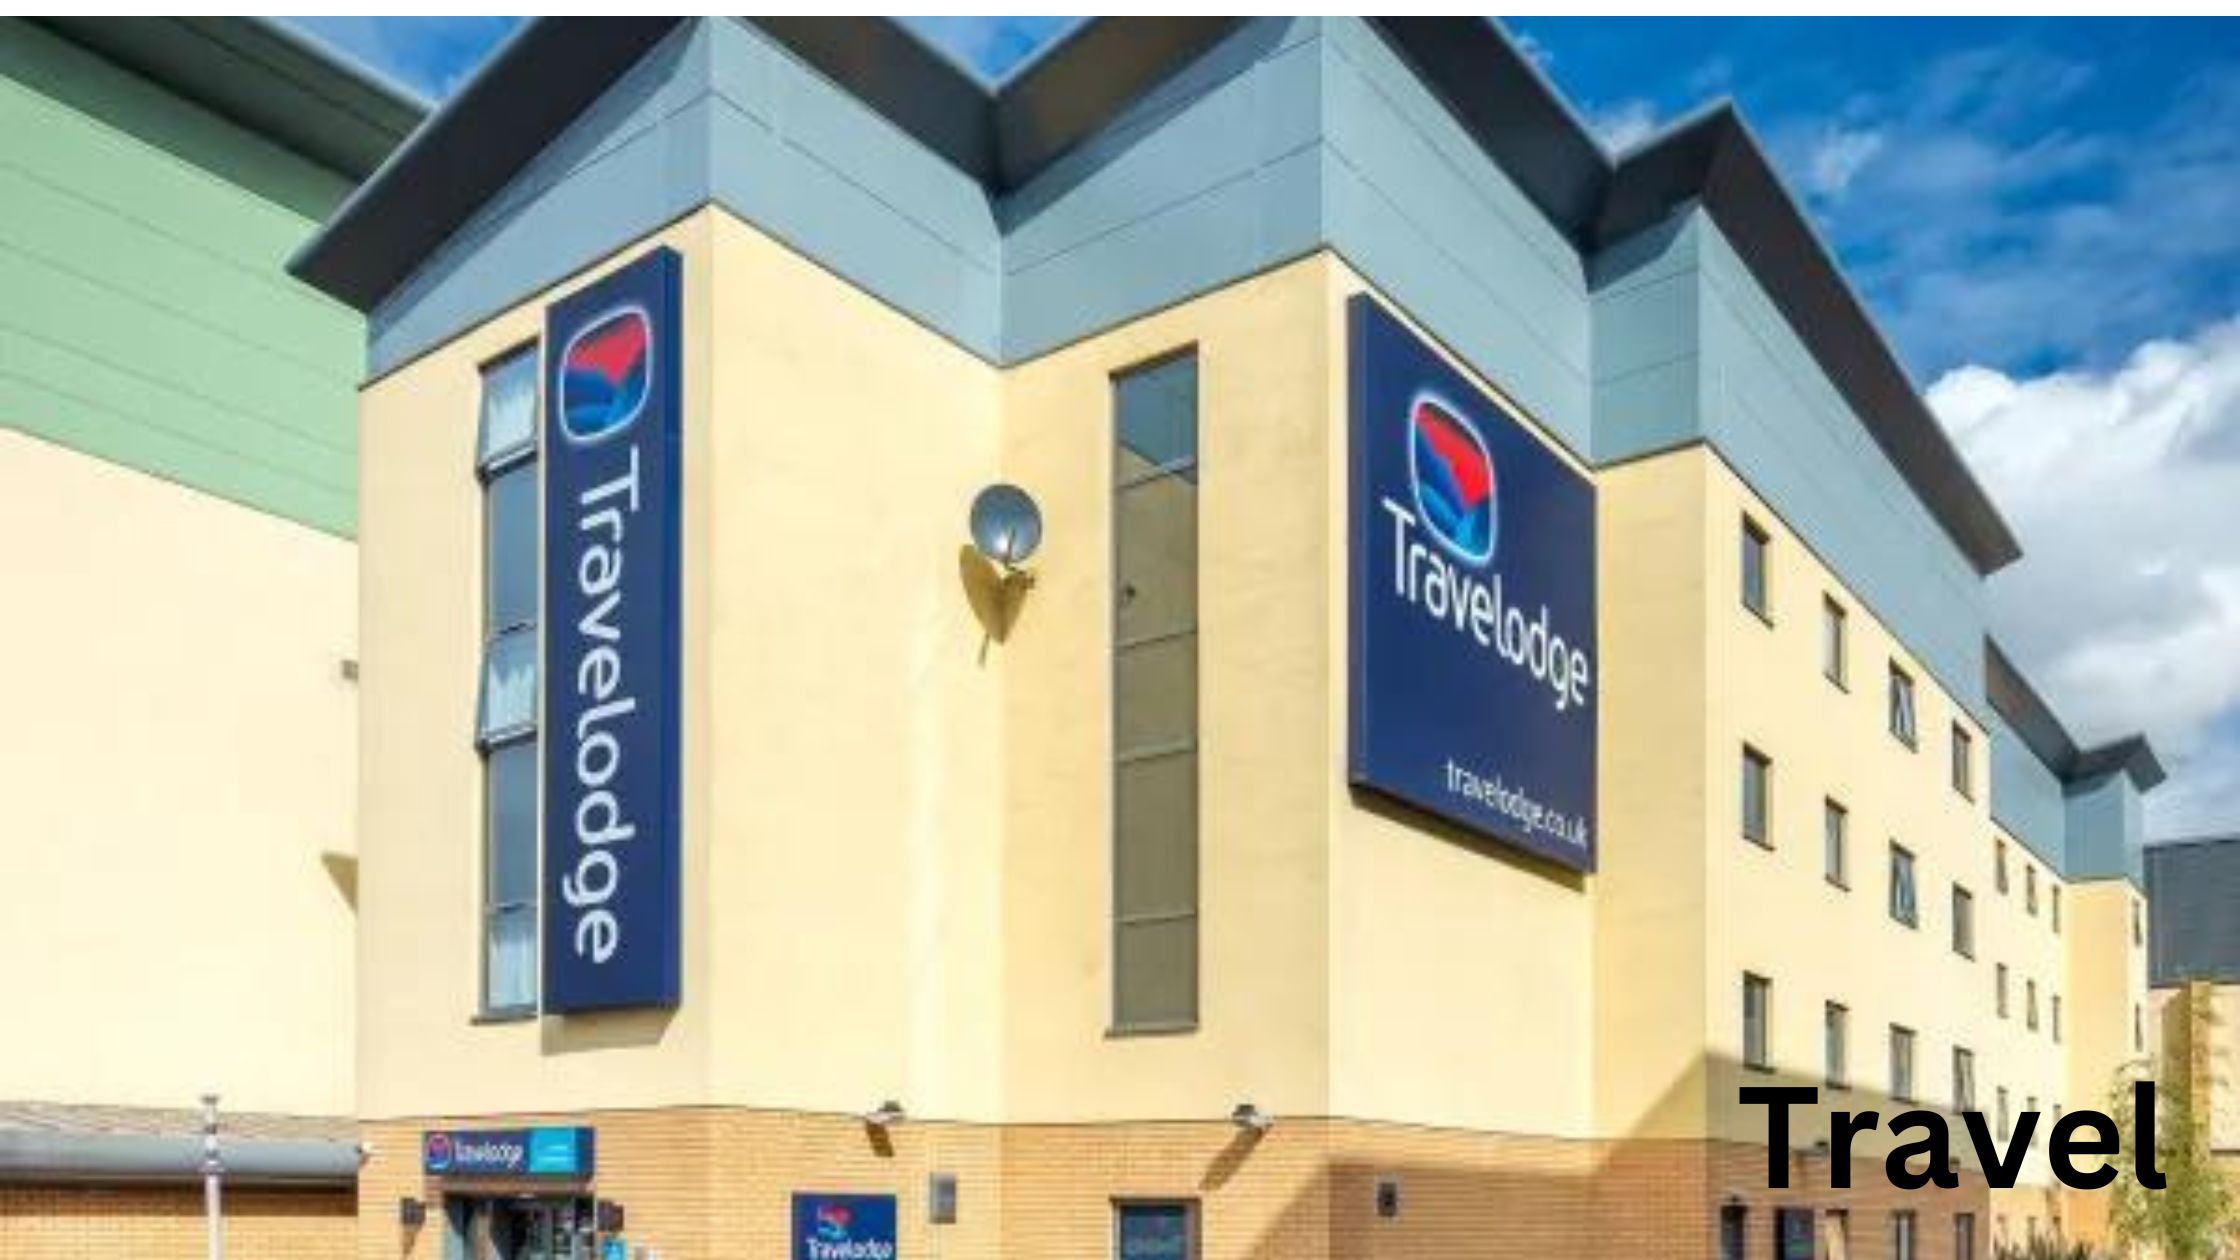 Travelodge Locations In UK